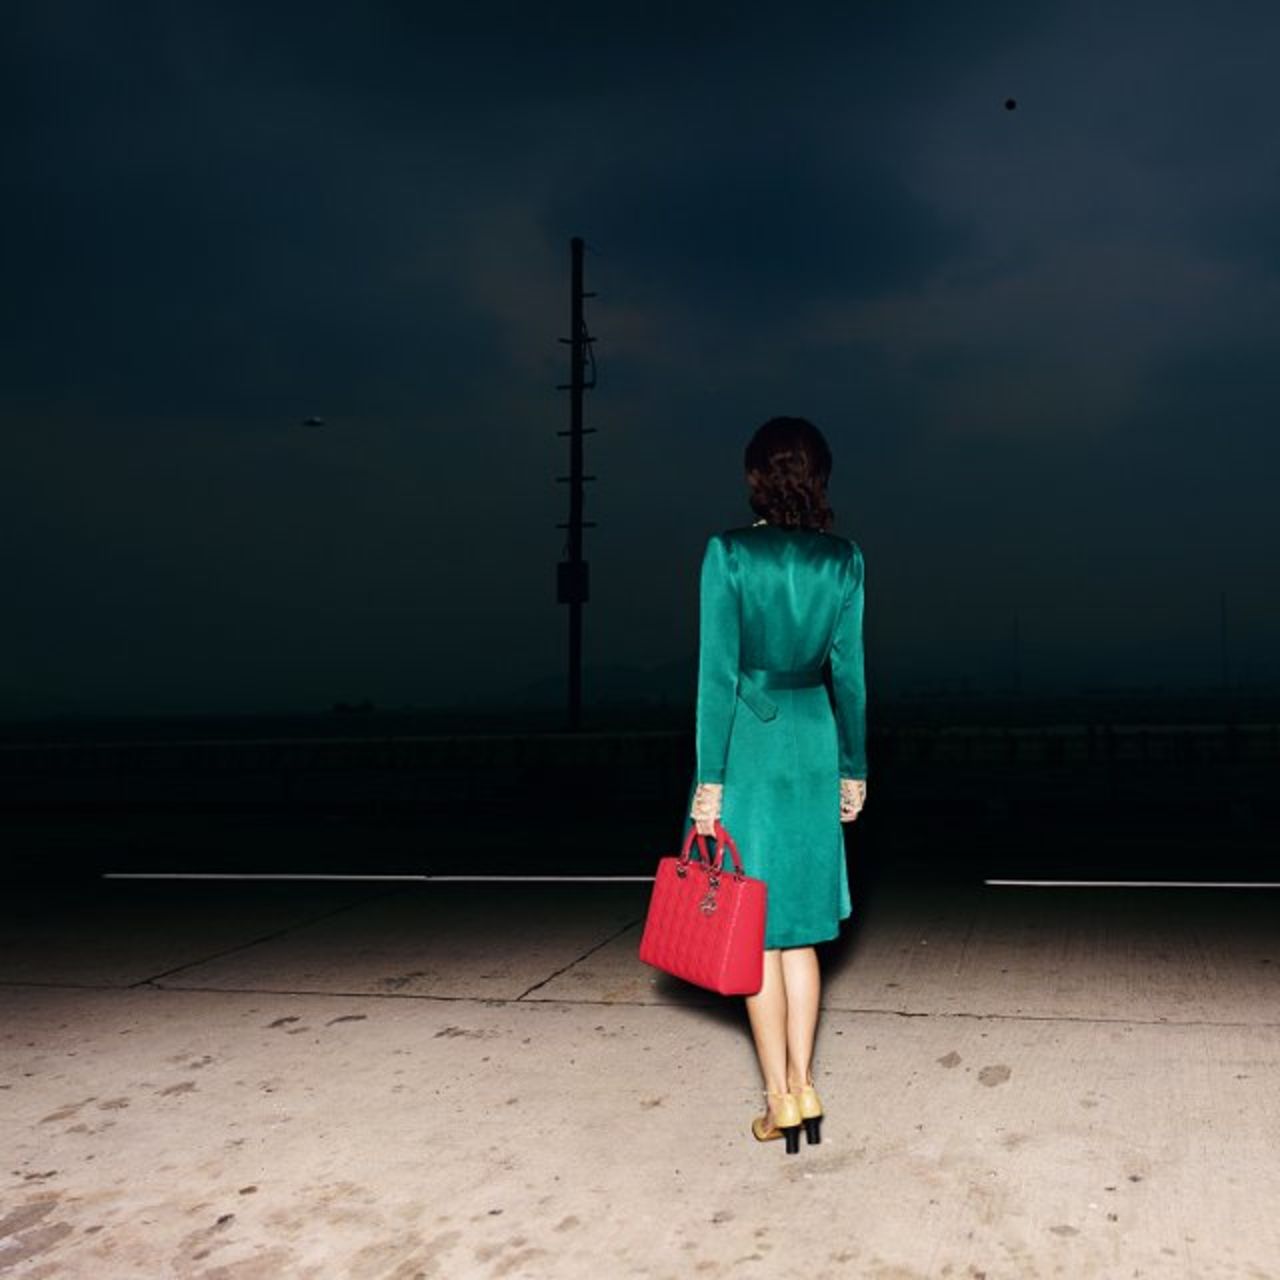 Quentin Shih became something of a regular contributor to the house of Dior, and also took this mysterious image titled <em>A Chinese Woman with a Lady Dior Handbag</em> in 2011. 